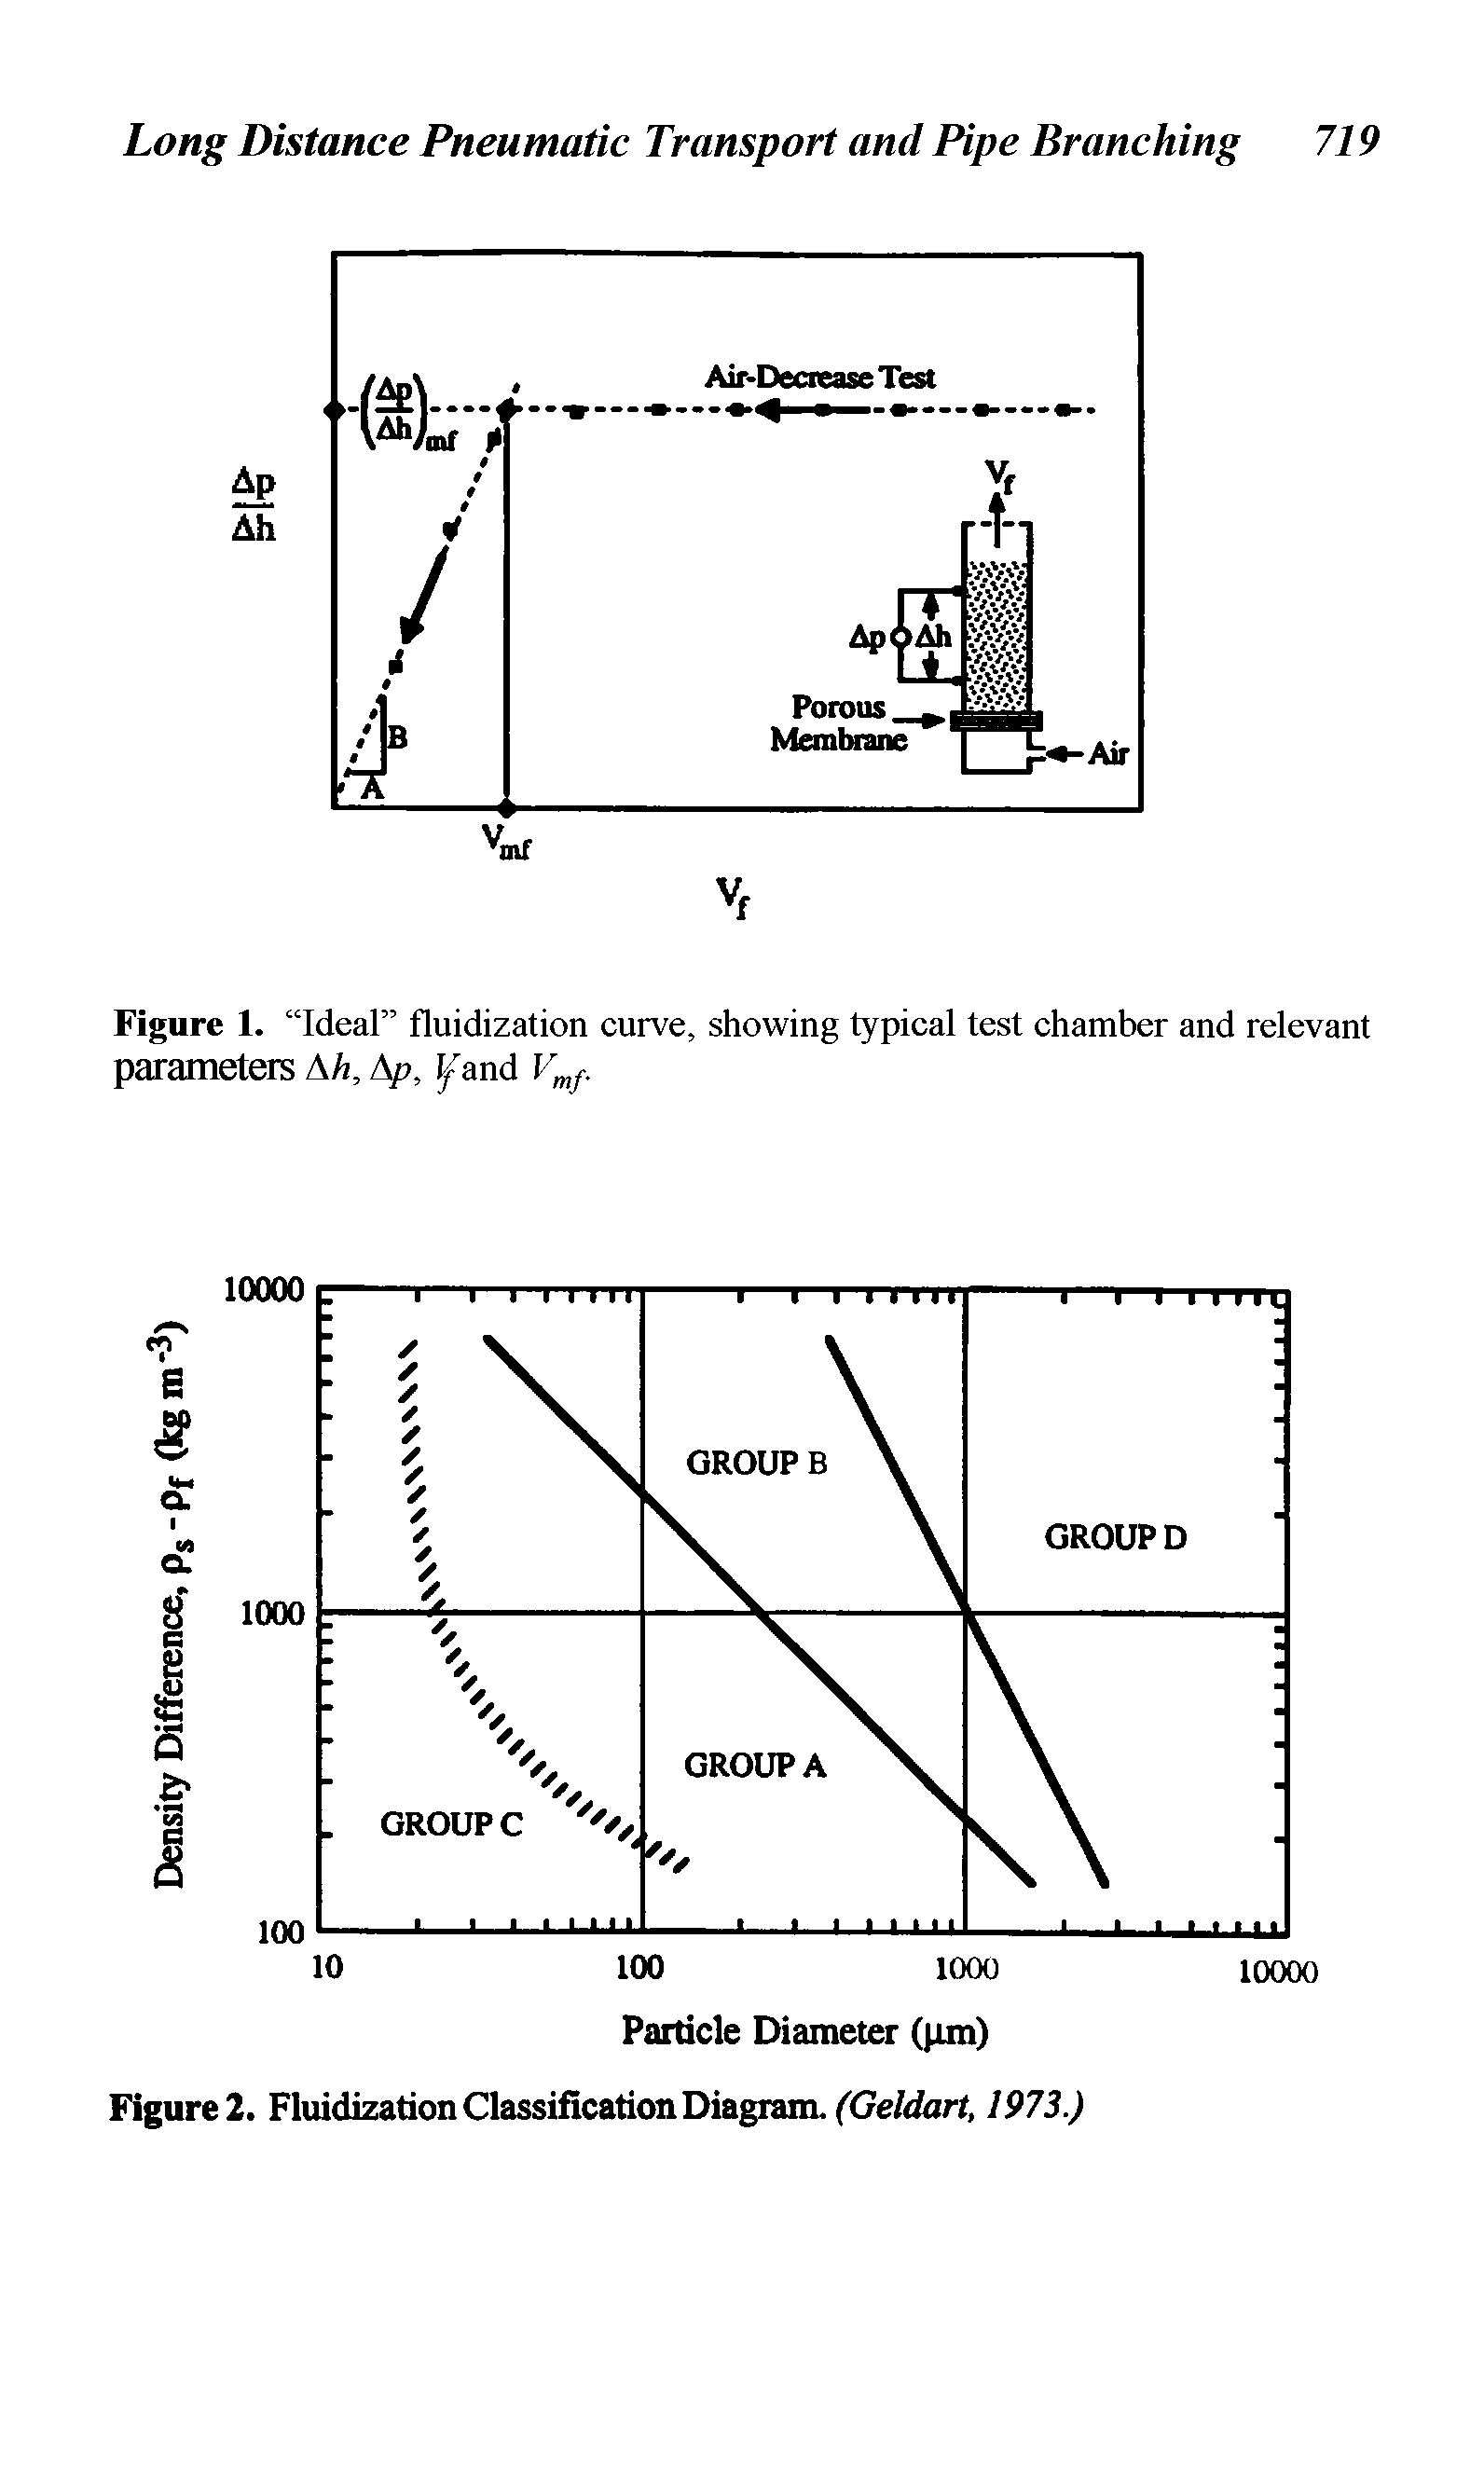 Figure 1. Ideal fluidization curve, showing typical test chamber and relevant parameters Ah, Ap, l and Vmf.